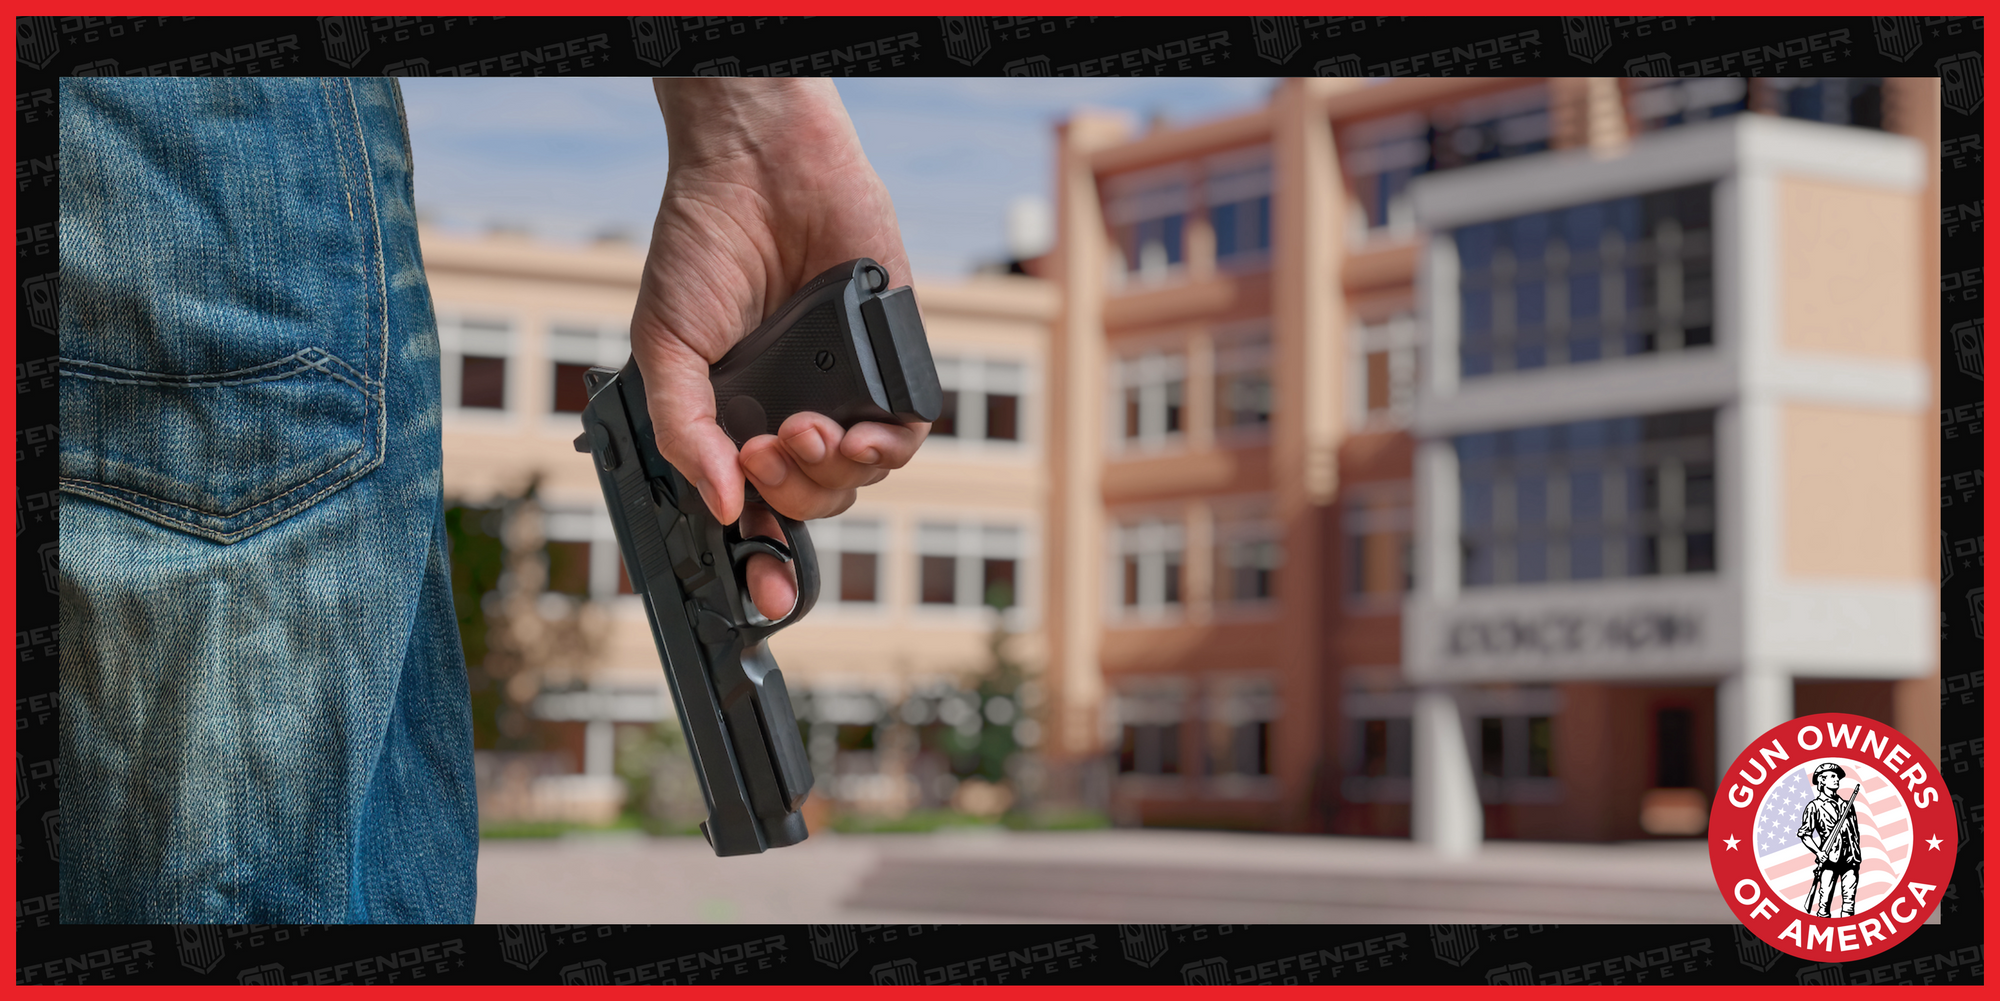 🚨[TAKE ACTION] HOUSE OF REPS. PASSED GUN CONTROL… AGAIN!